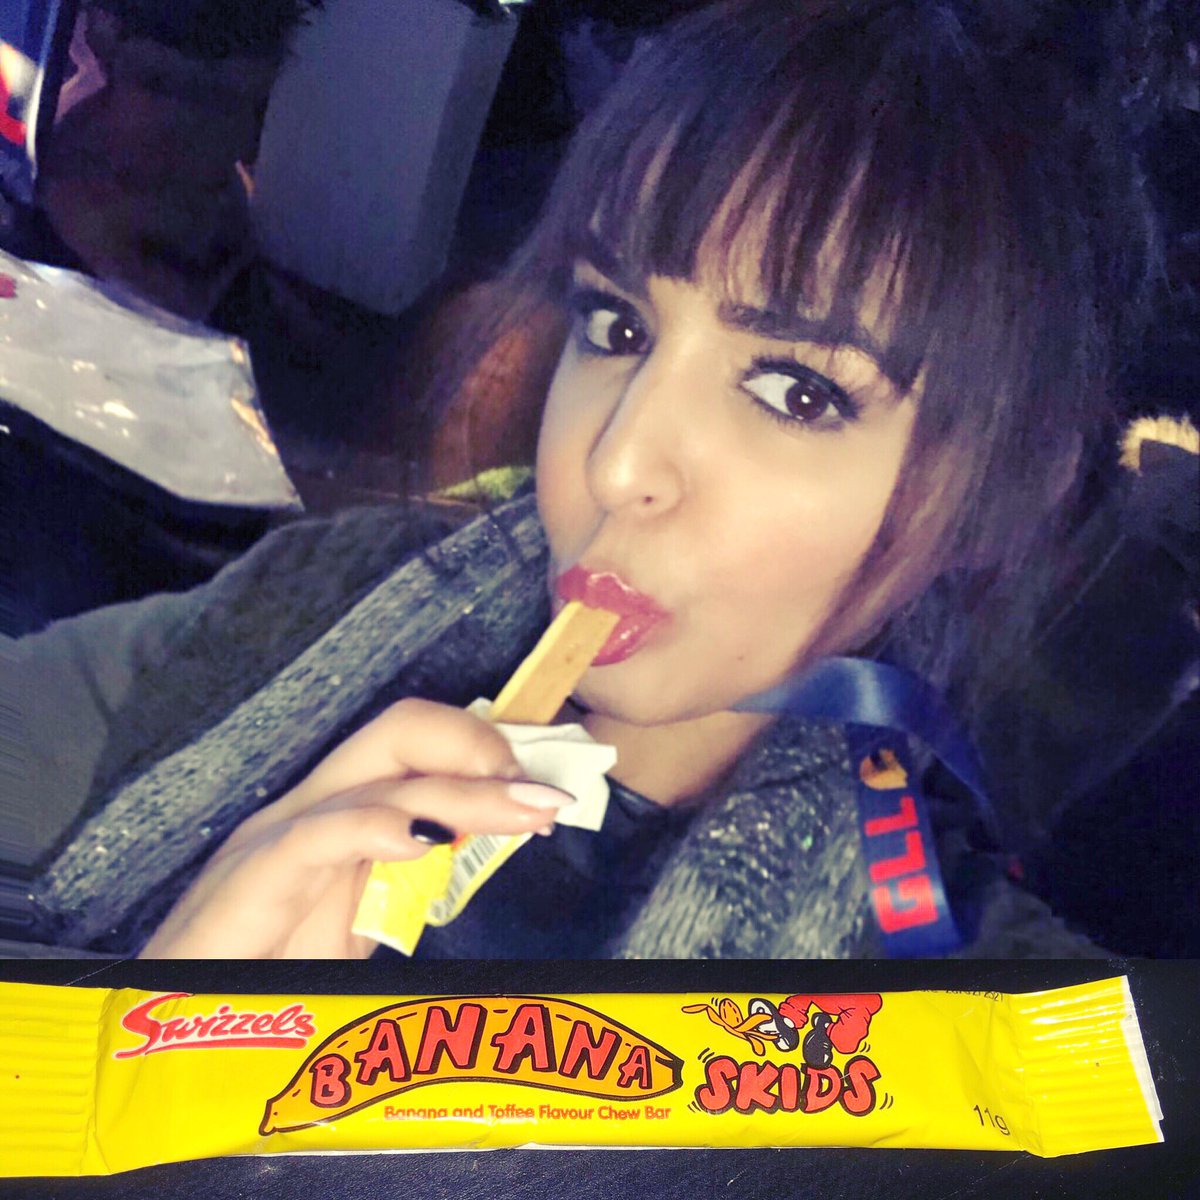 Backstage @globallootleague trying some Swedish sweeties “banana skids” banana and toffee yummy ???? very chewy ???? https://t.co/EJS2weW2NX